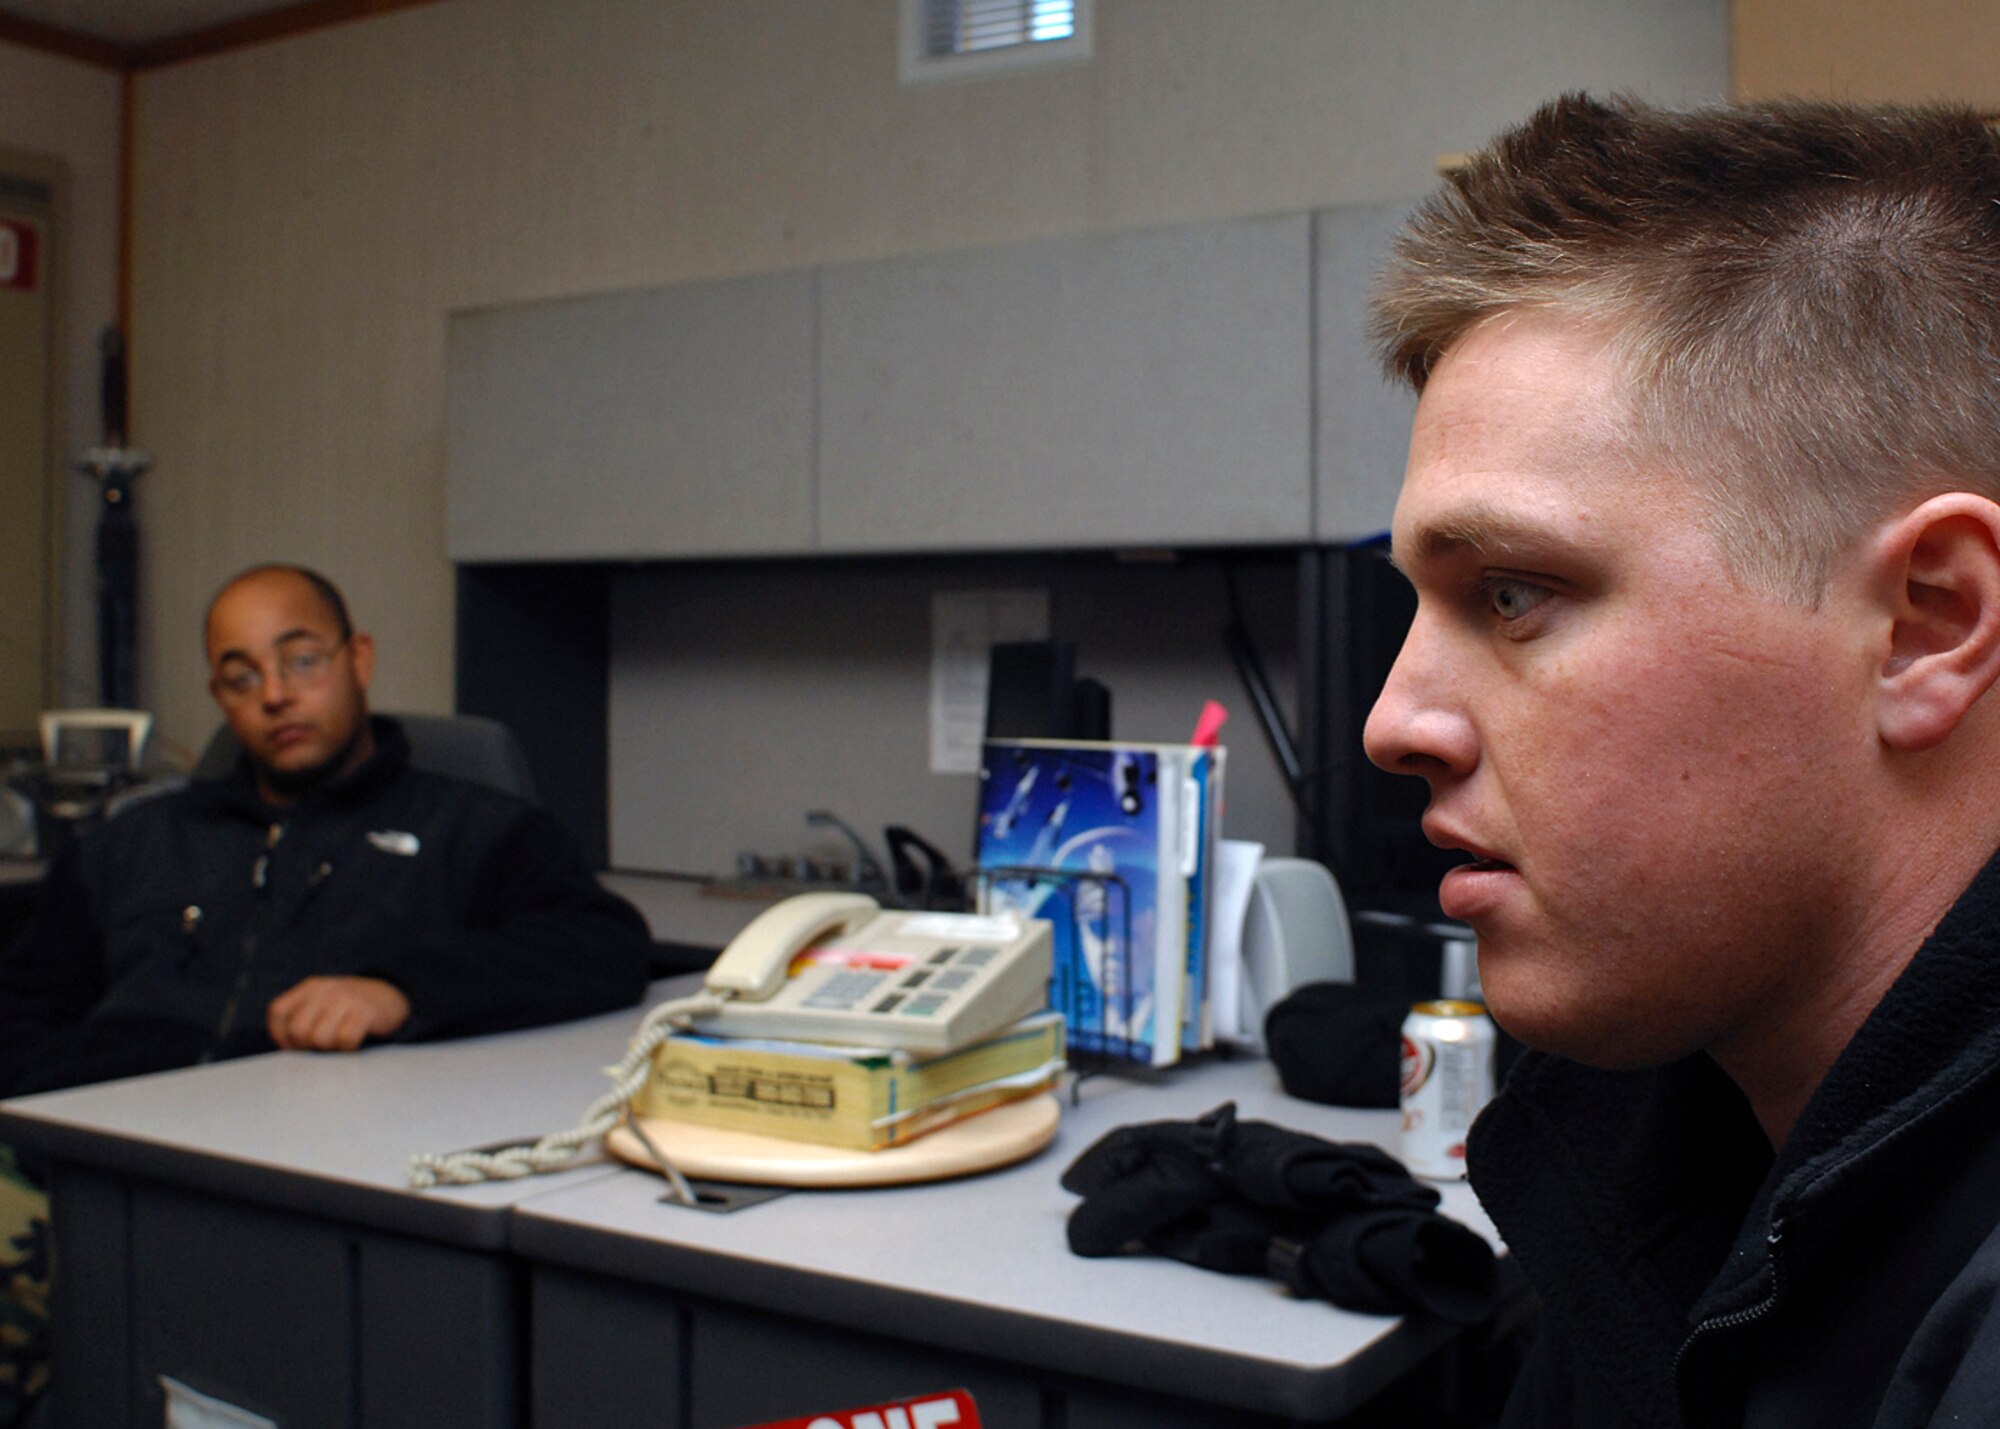 KIRTLAND AIR FORCE BASE, N.M. -- Senior Airman Nick Worthington (foreground) and Senior Airman William Zow (background) discuss their experiences while they were deployed in support of Operation Iraqi Freedom. (U.S. Air Force photo by Todd Berenger)